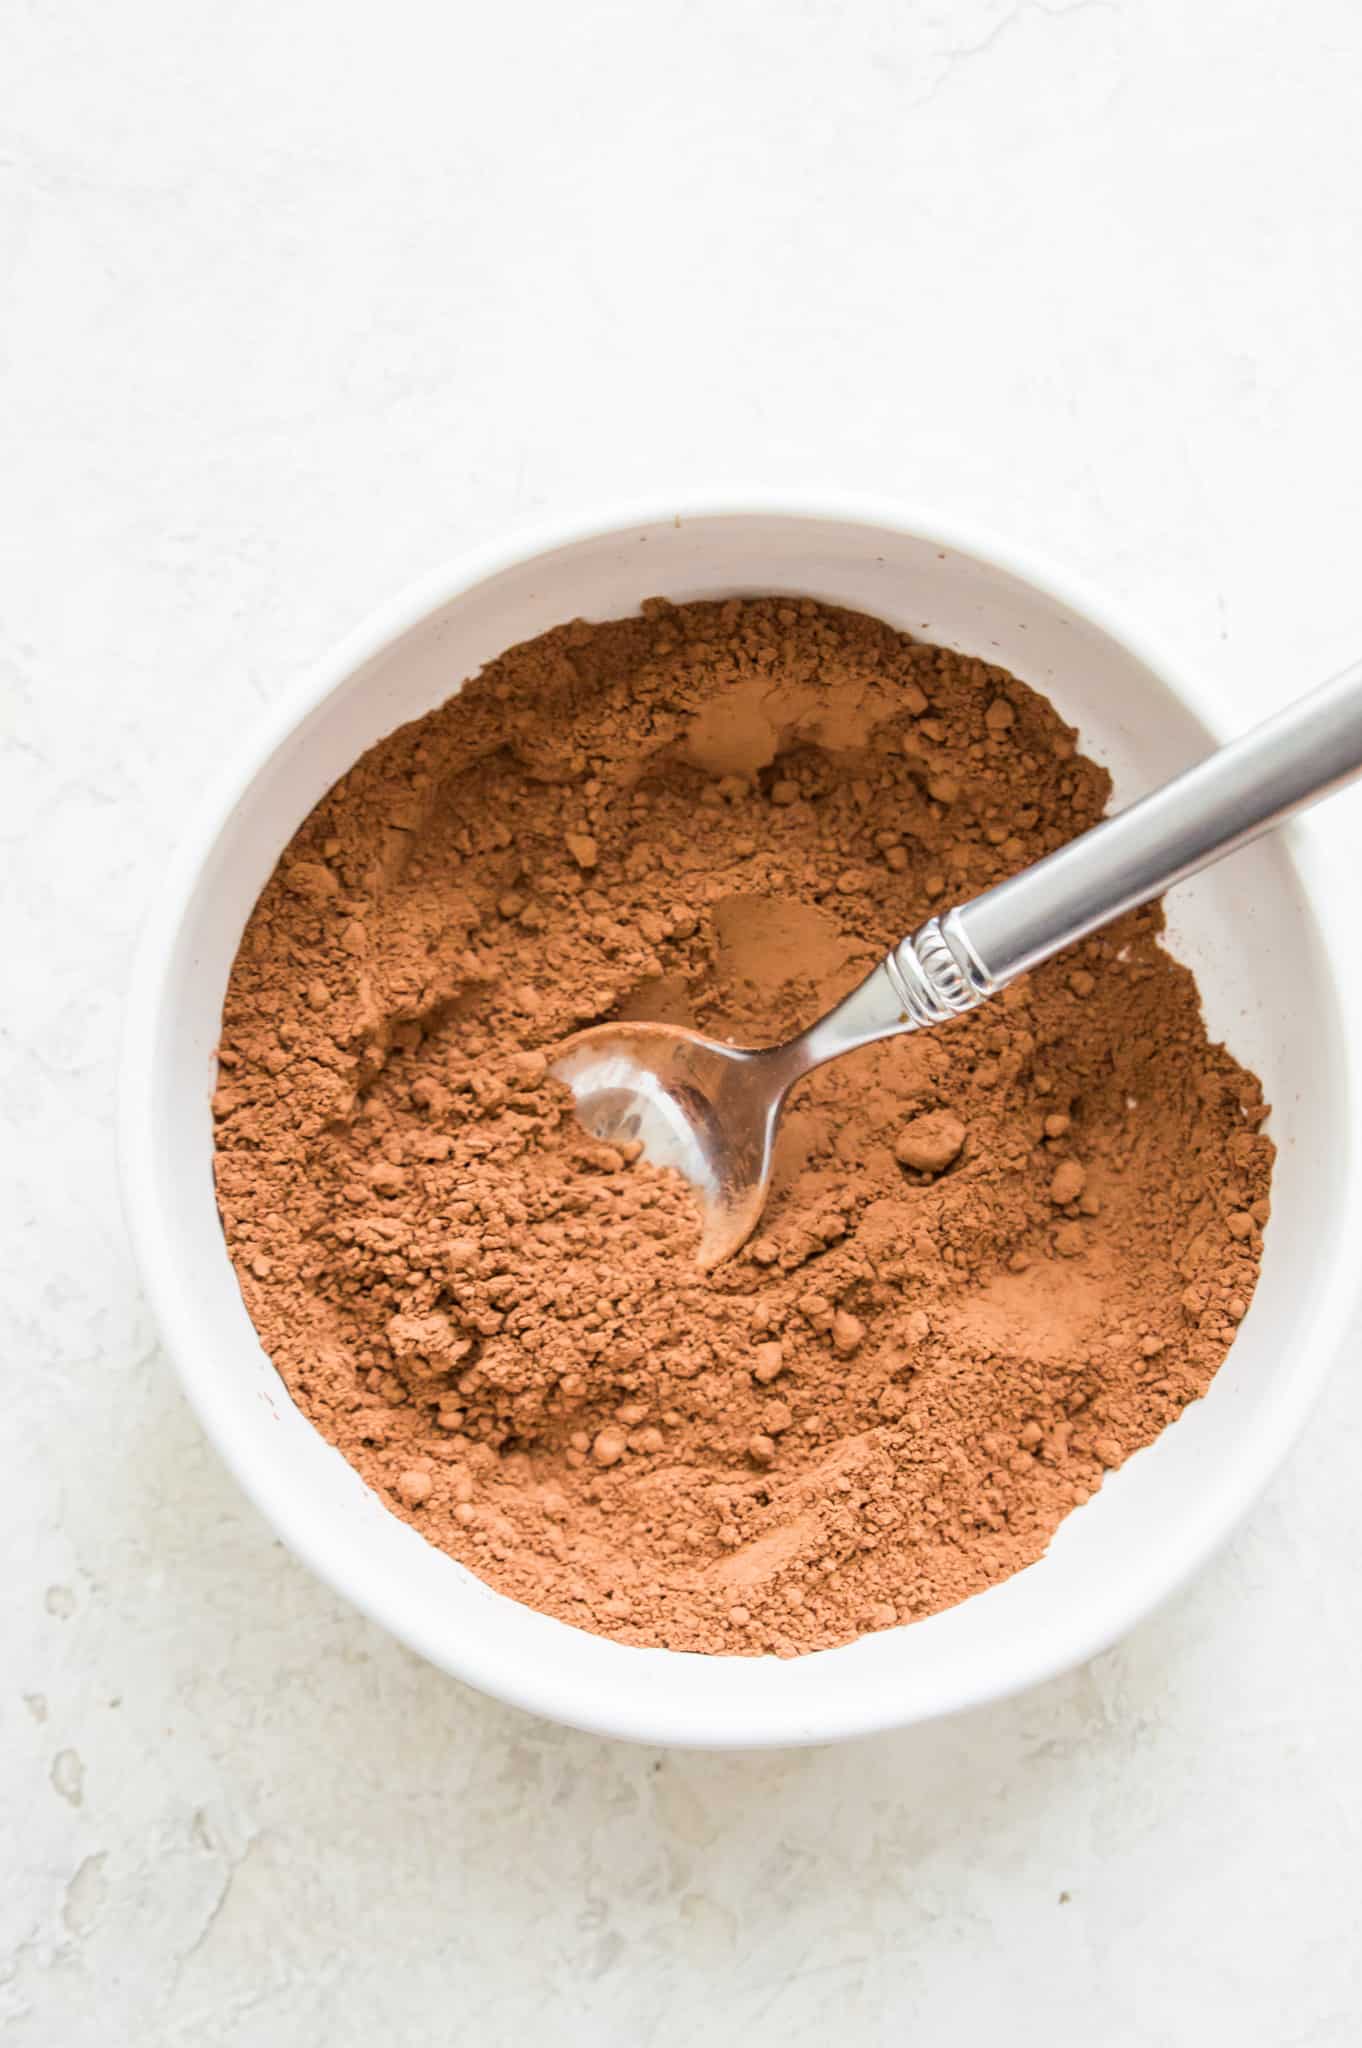 Hot chocolate powder mix in a bowl with a spoon.